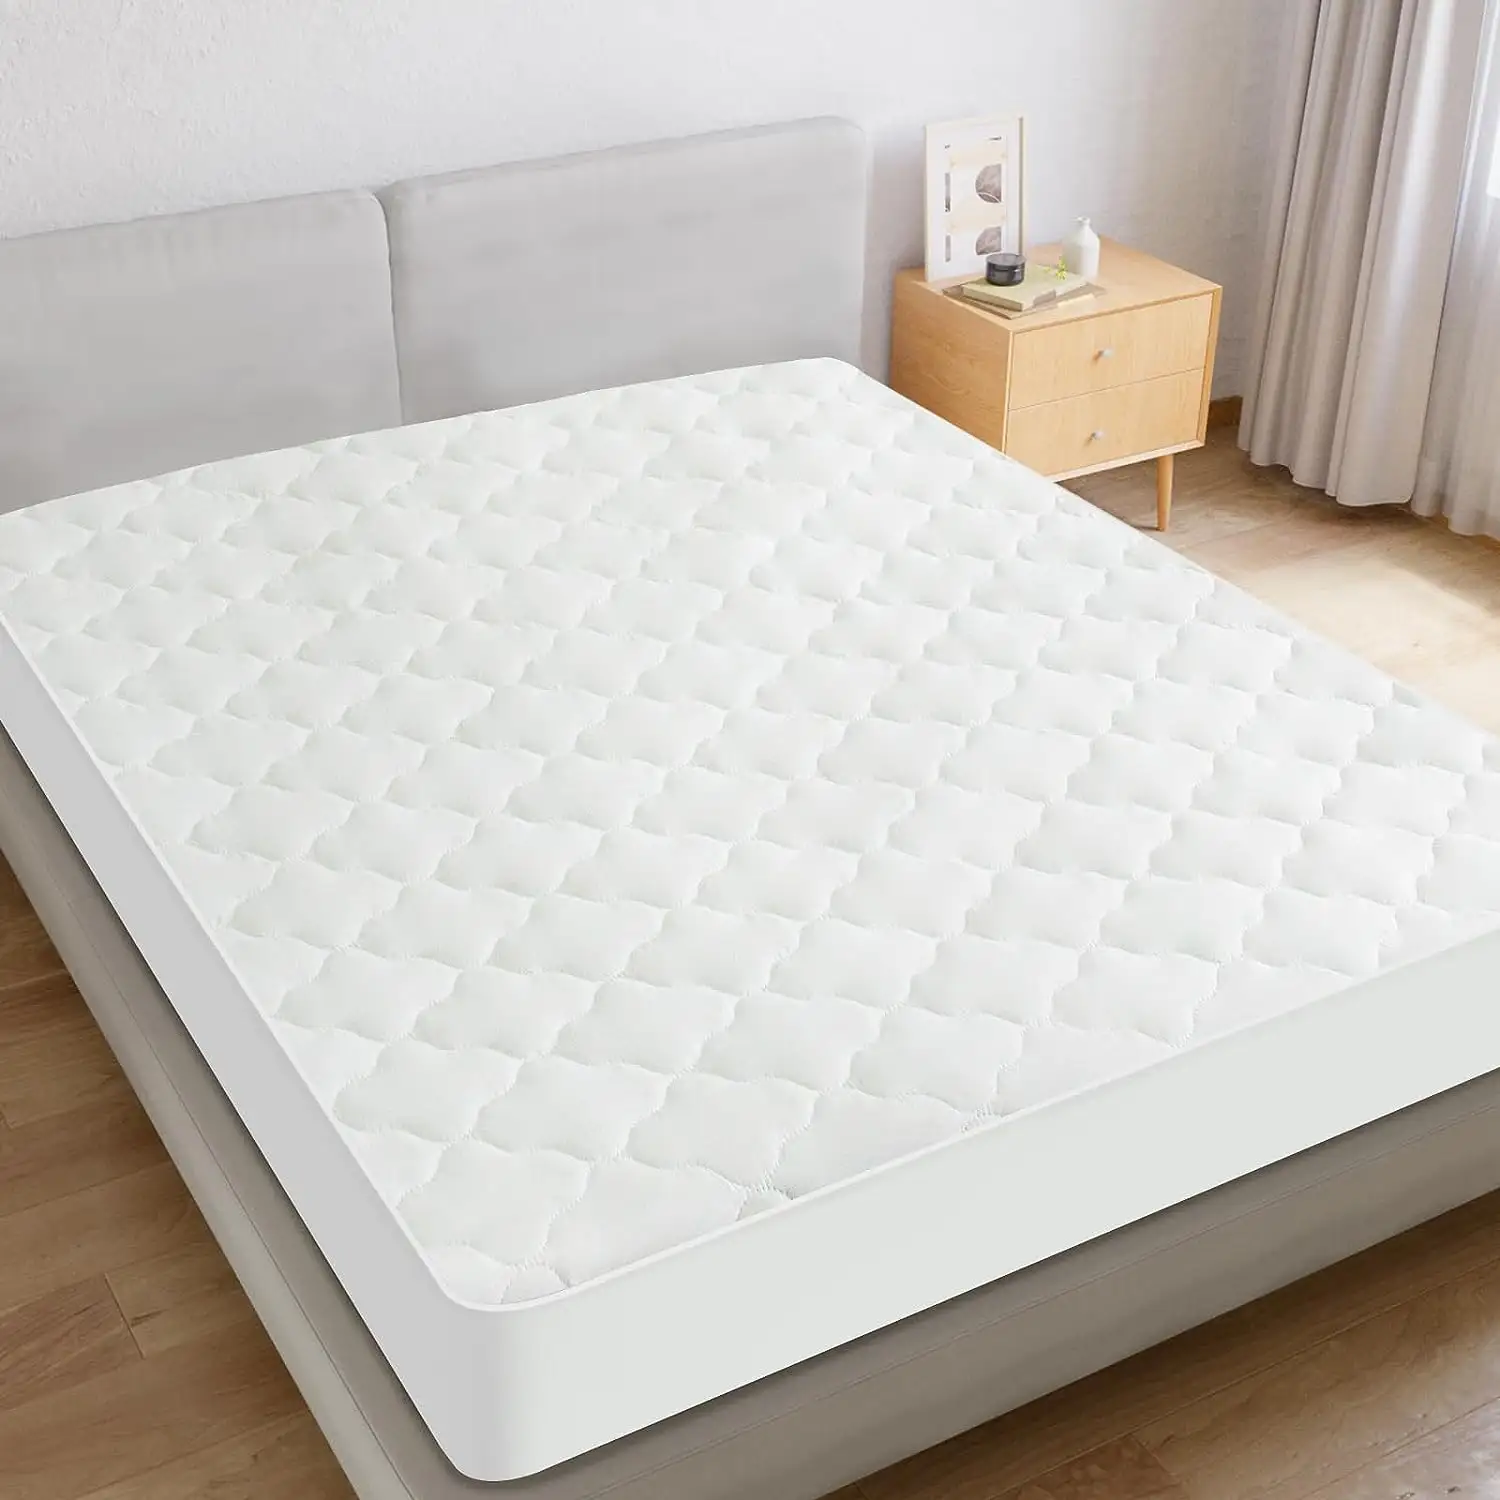 Wholesale Breathable Noiseless Bed Protector Cover Quilted Fitted with Deep Pocket Double Size Waterproof Mattress Pad Topper